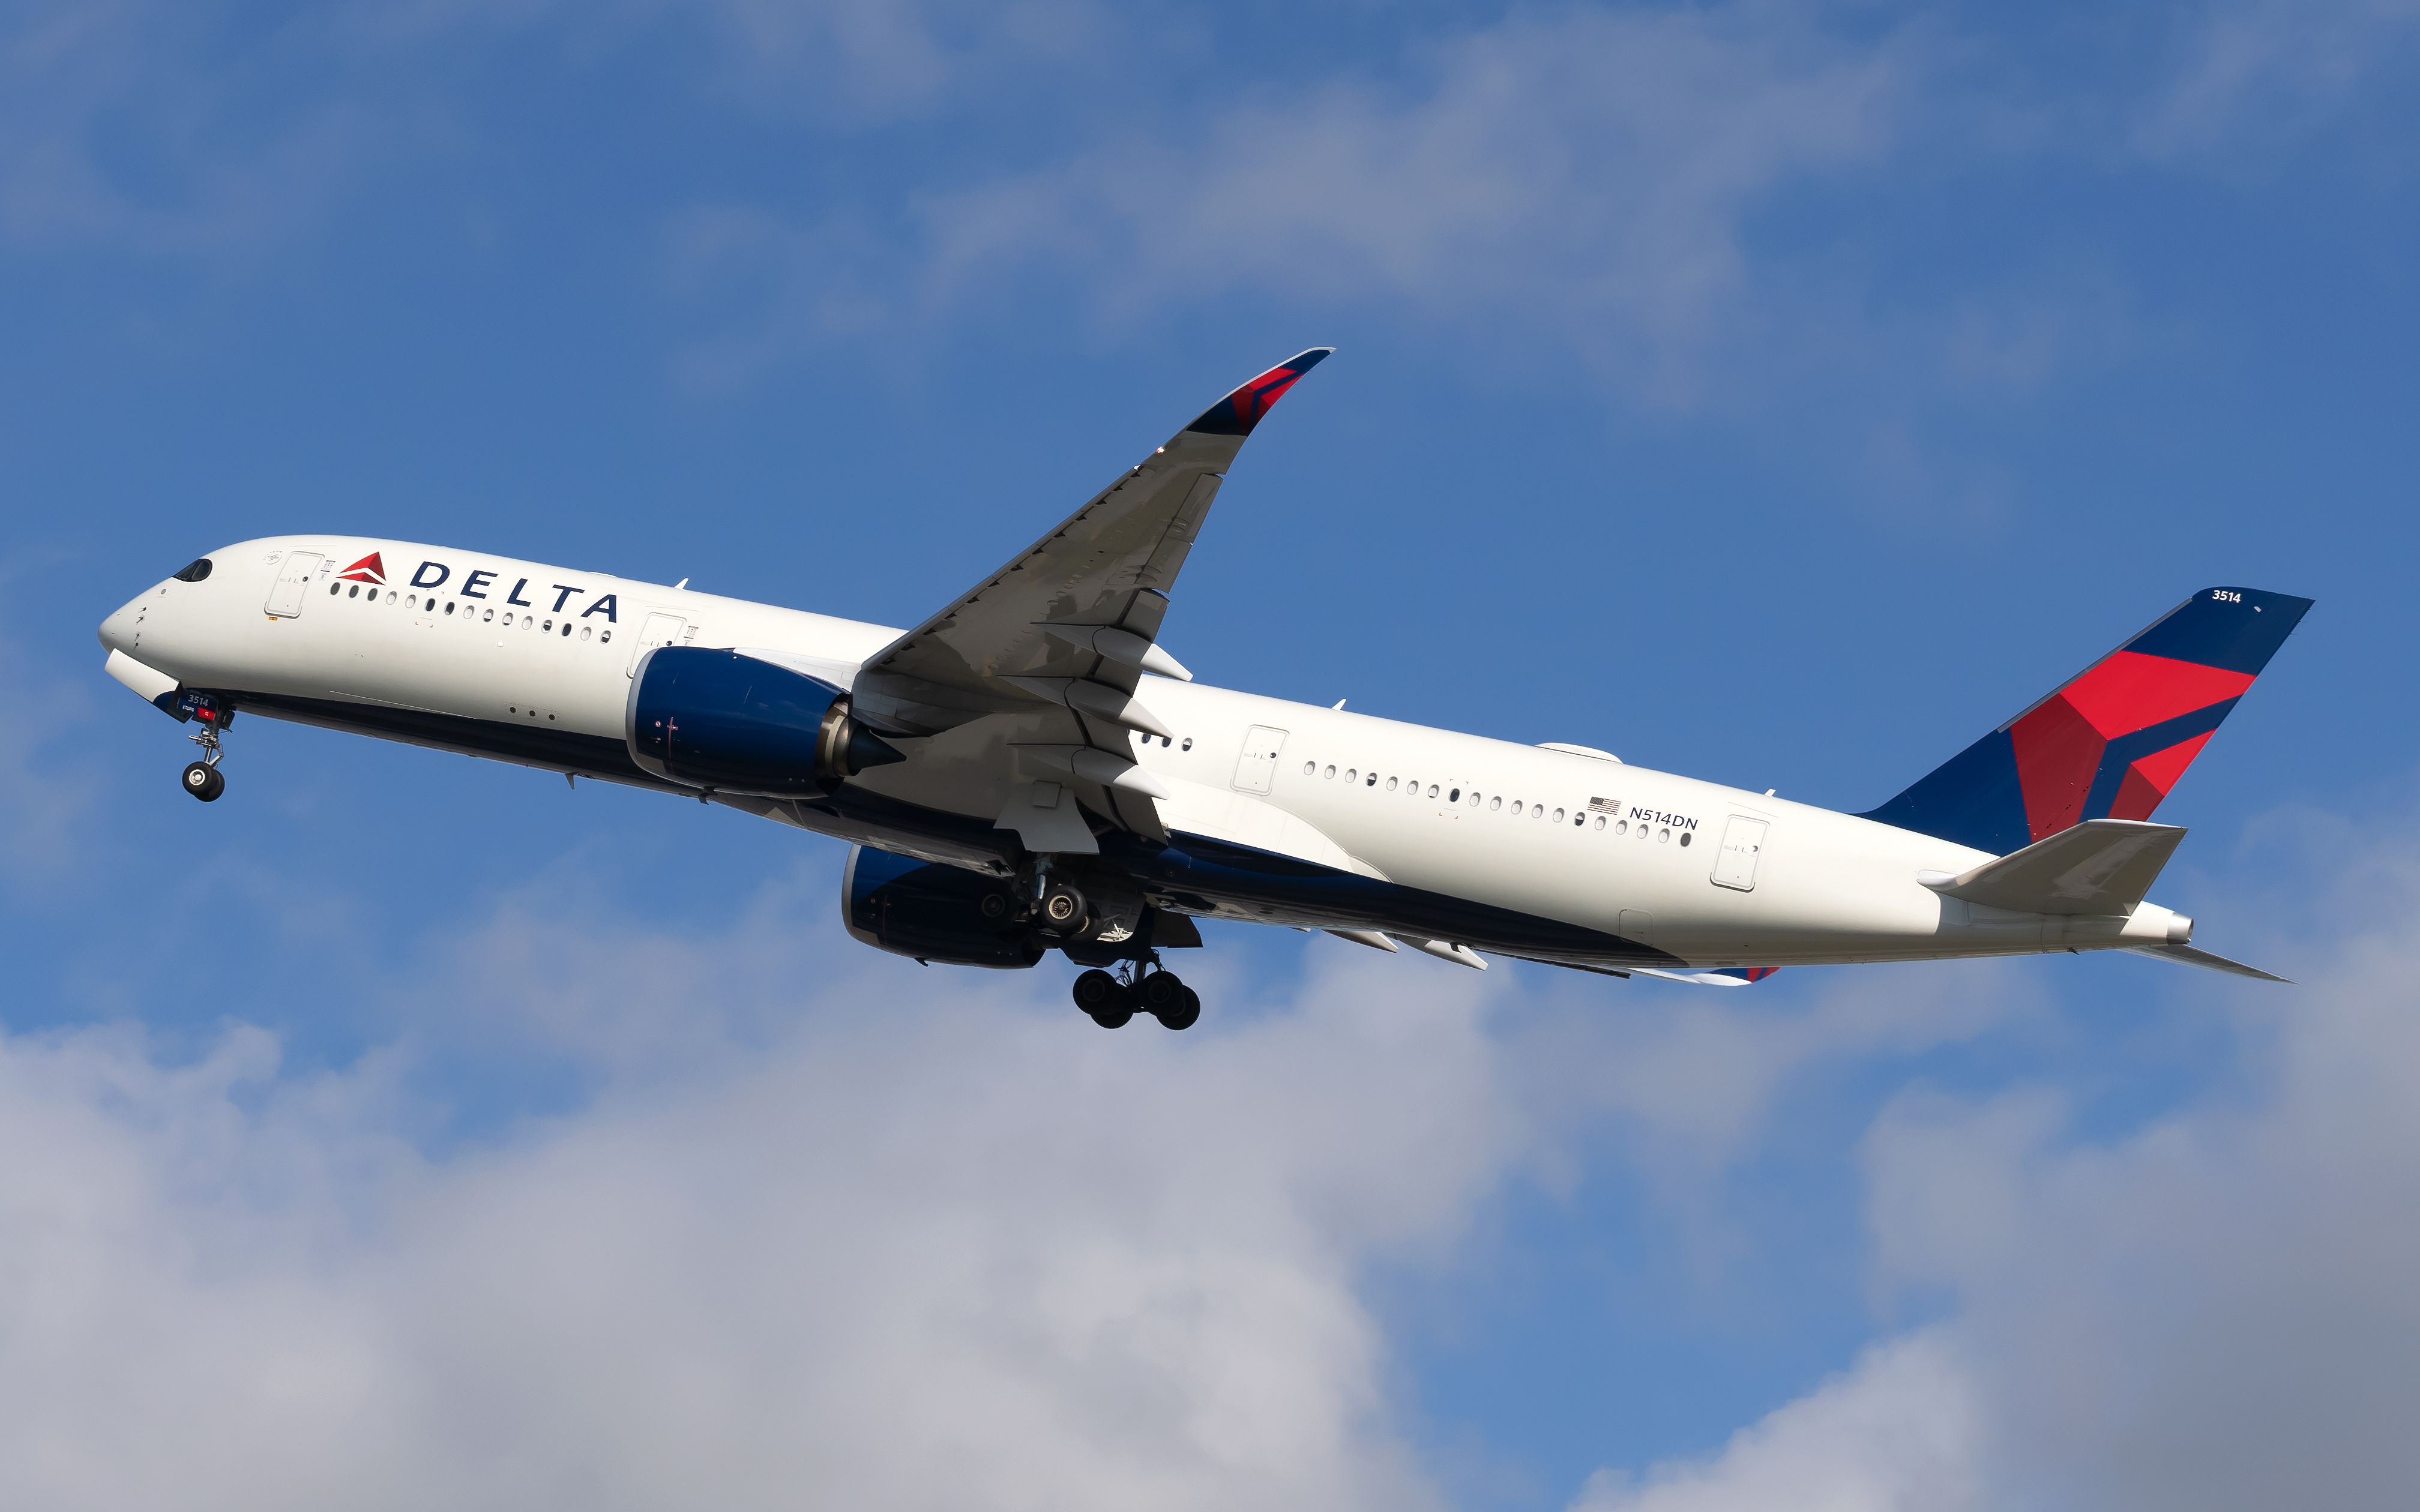 Delta Air Lines A350-900 flying